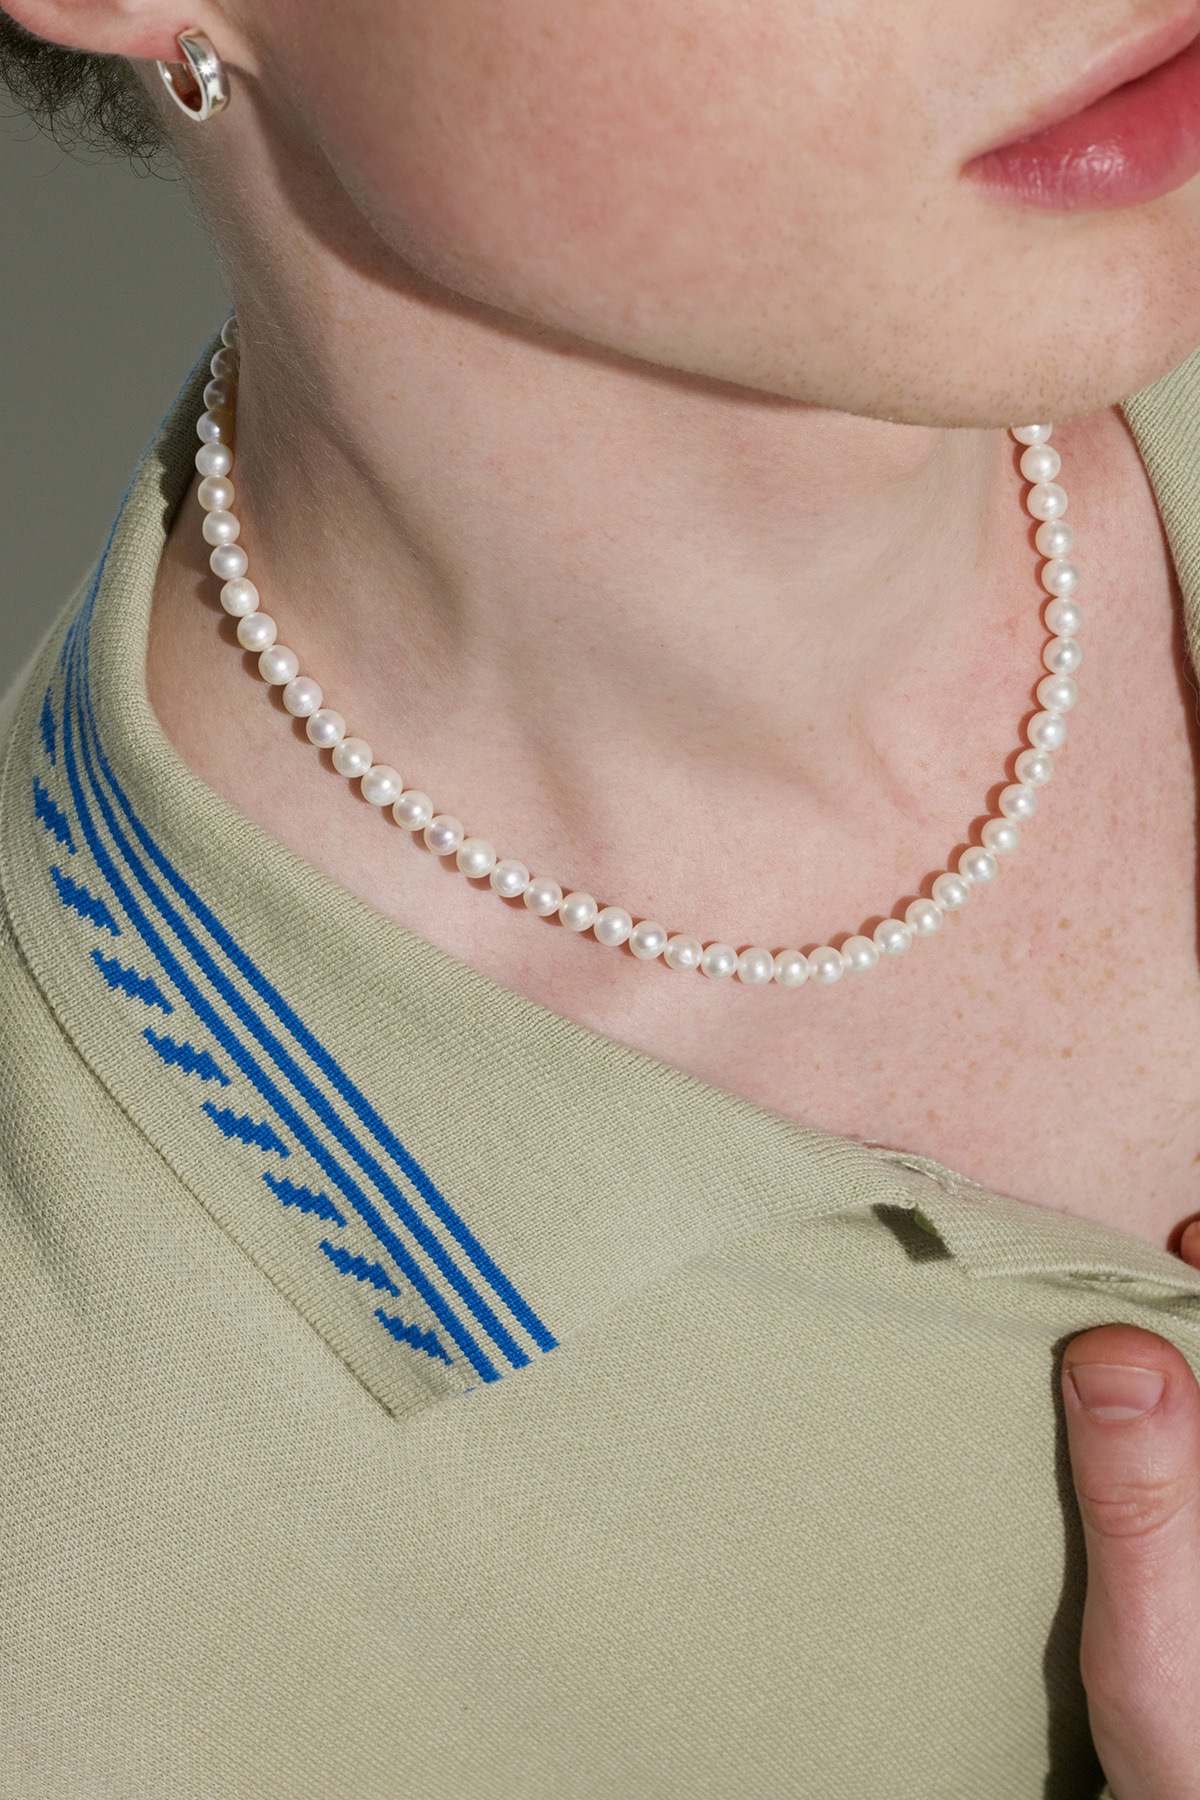 The Pearl Necklace For Mens 6mm